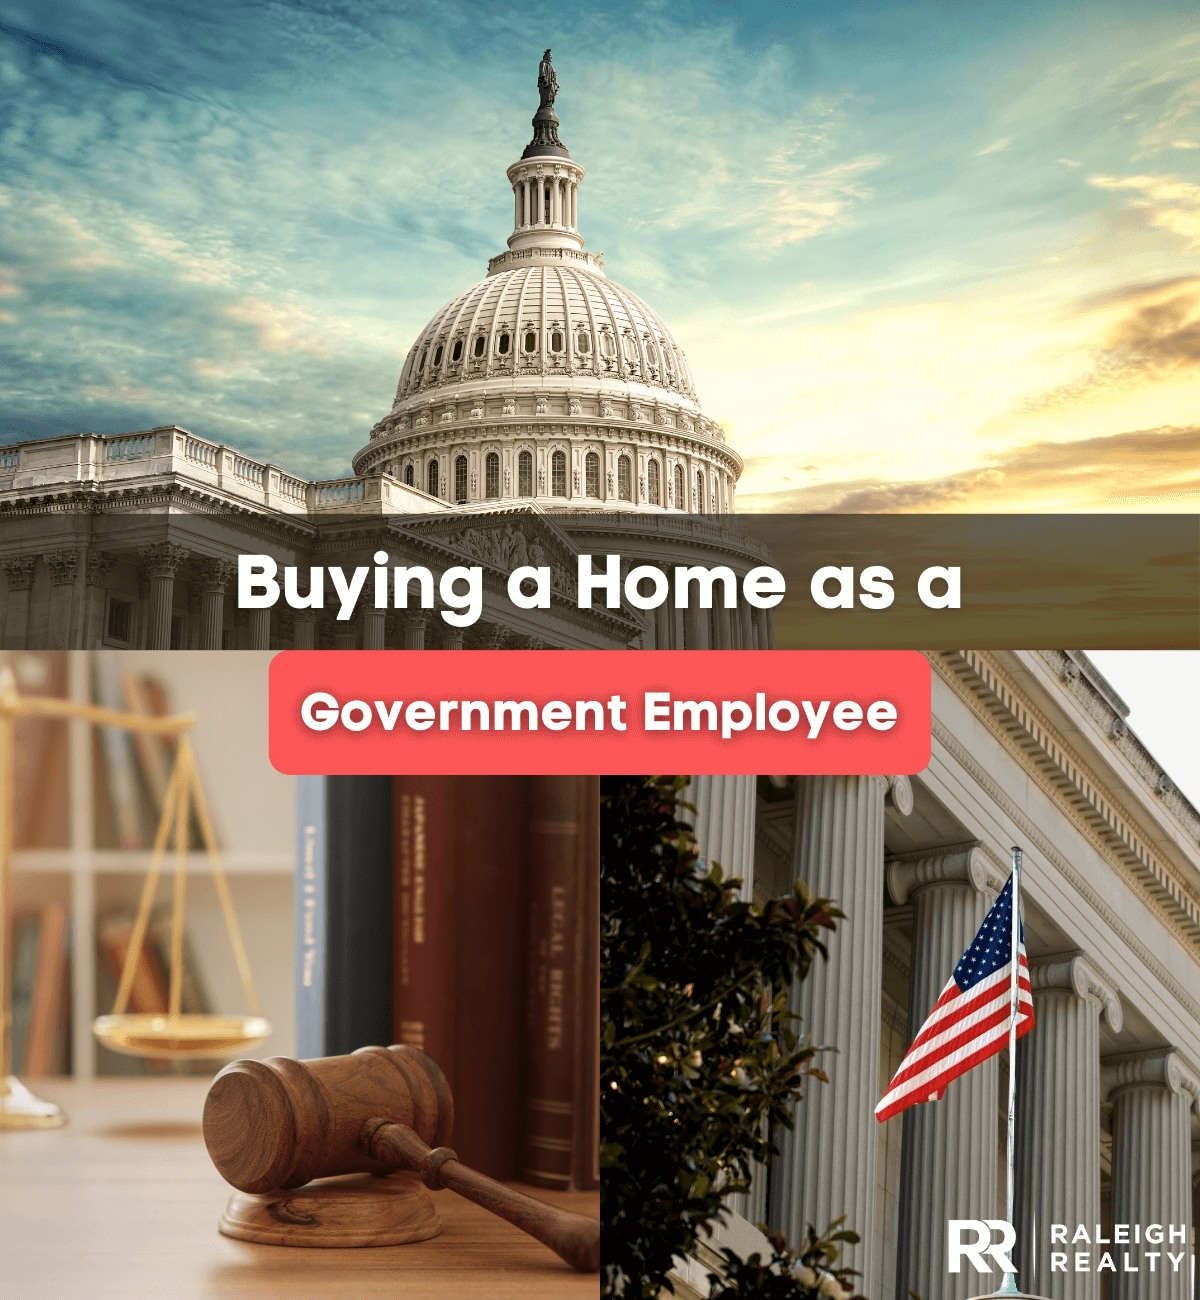 The Complete Guide to Buying a Home As a Government Employee